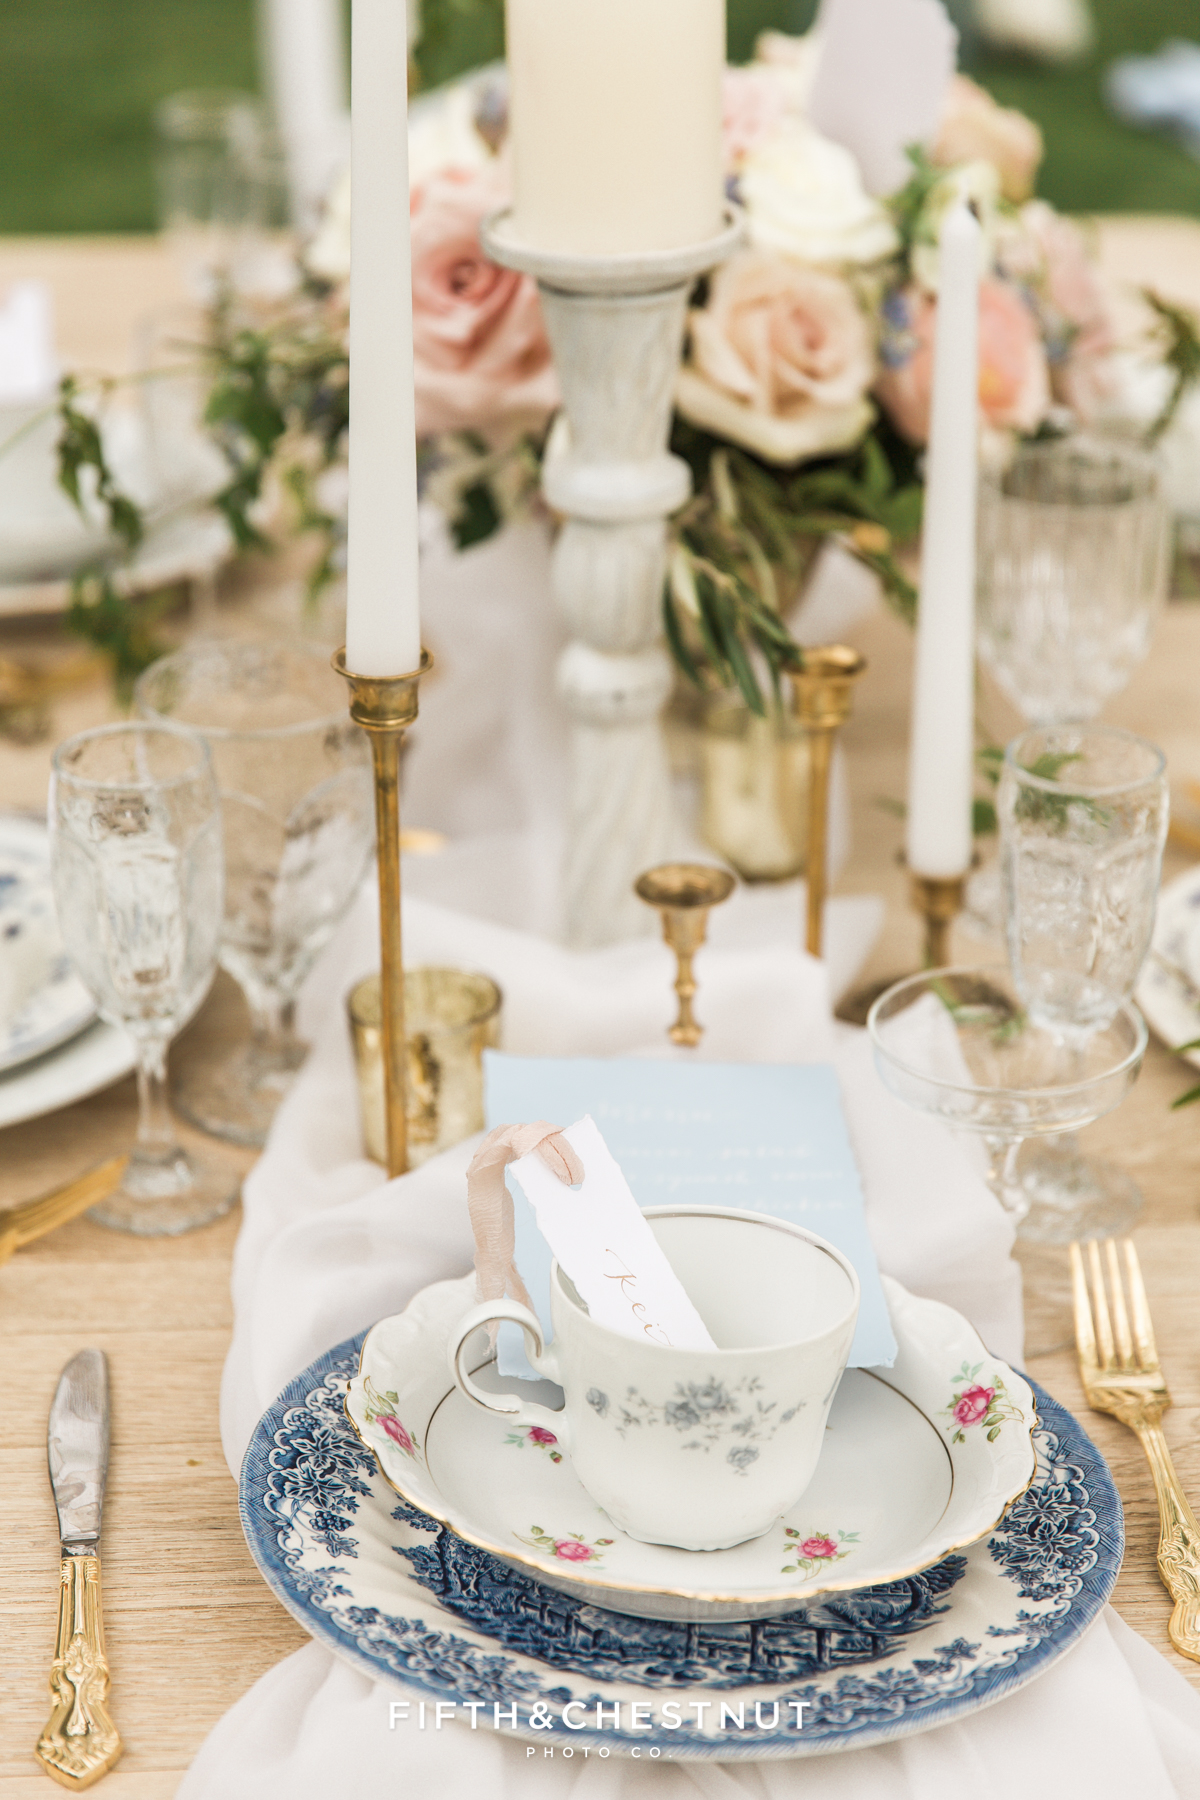 Place setting details with mismatched gold edged plates for a Dusty Blue Private Estate Country French Wedding Styled Shoot